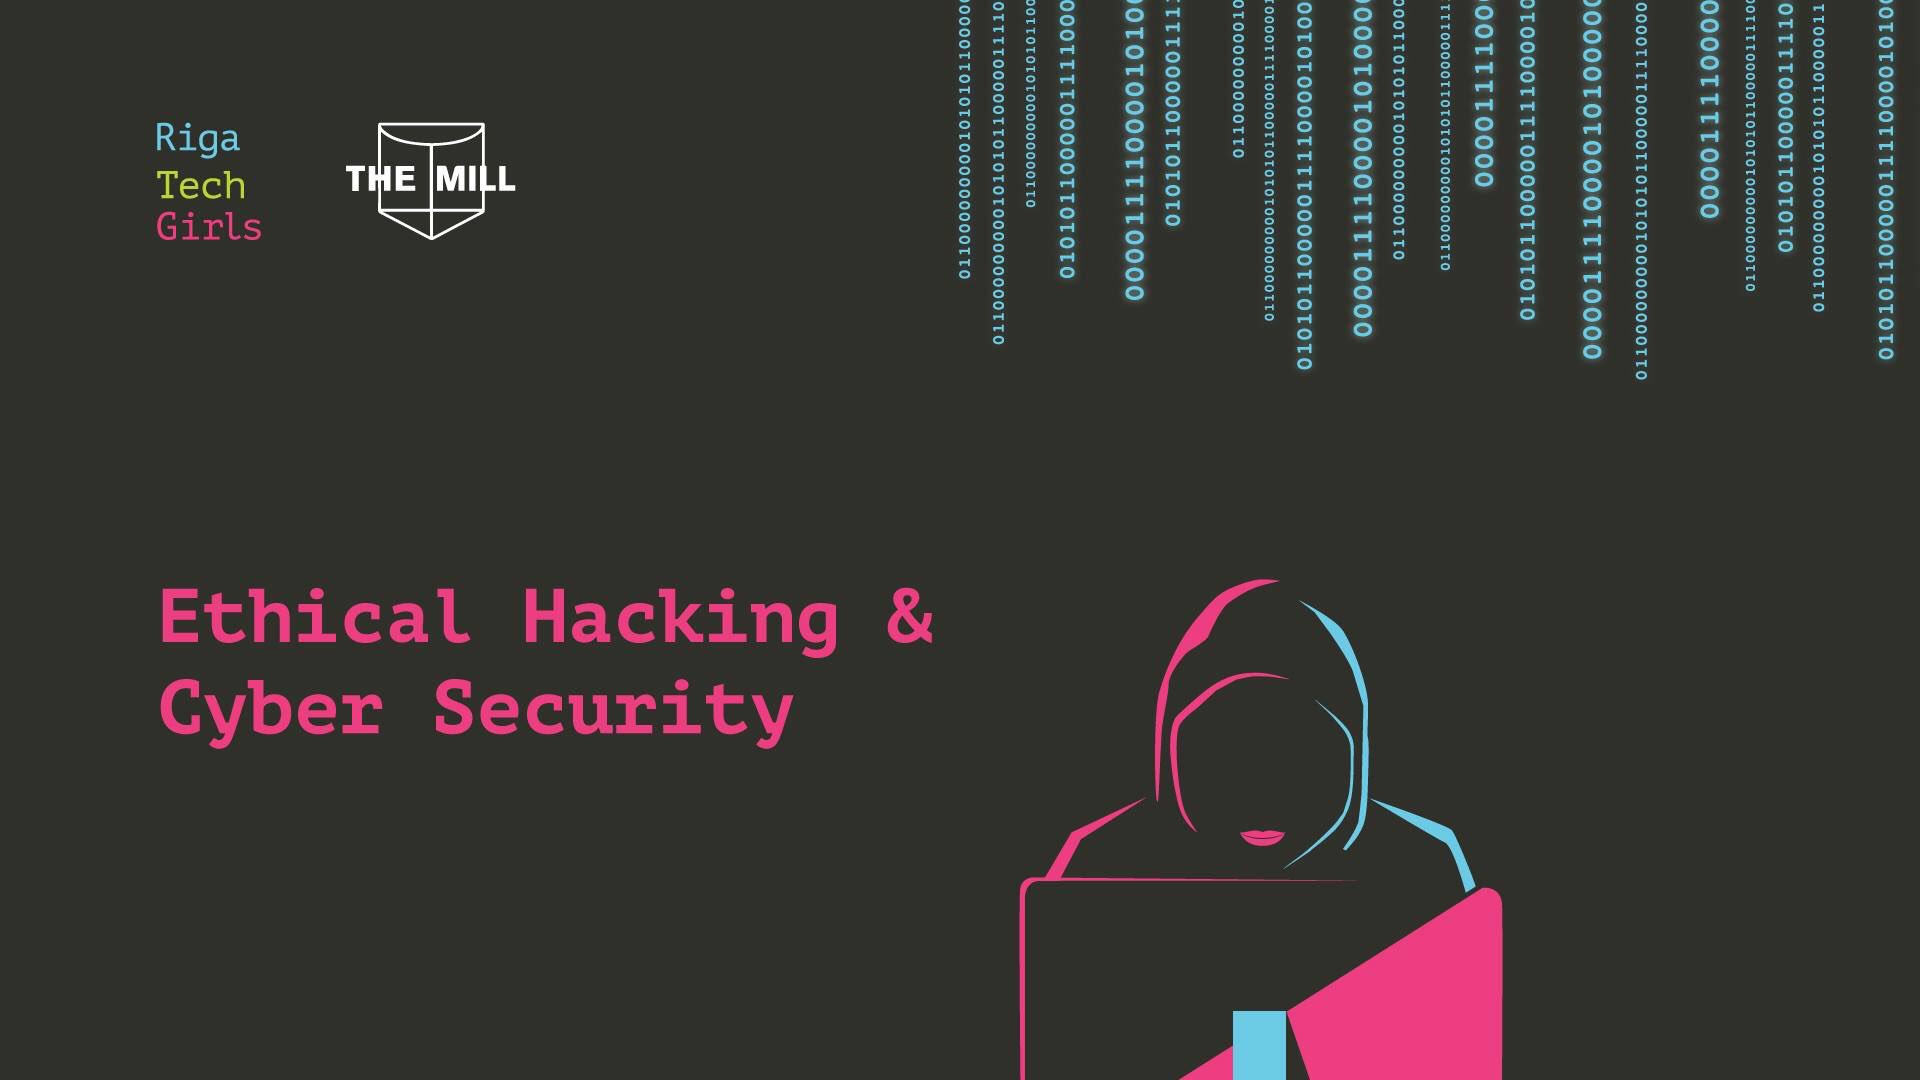 Riga TechGirls “Ethical Hacking And Cyber Security”. What Does It Mean? Do We Have Women Computer Security Experts In Latvia? How To Build Your Career If You Want To Focus On